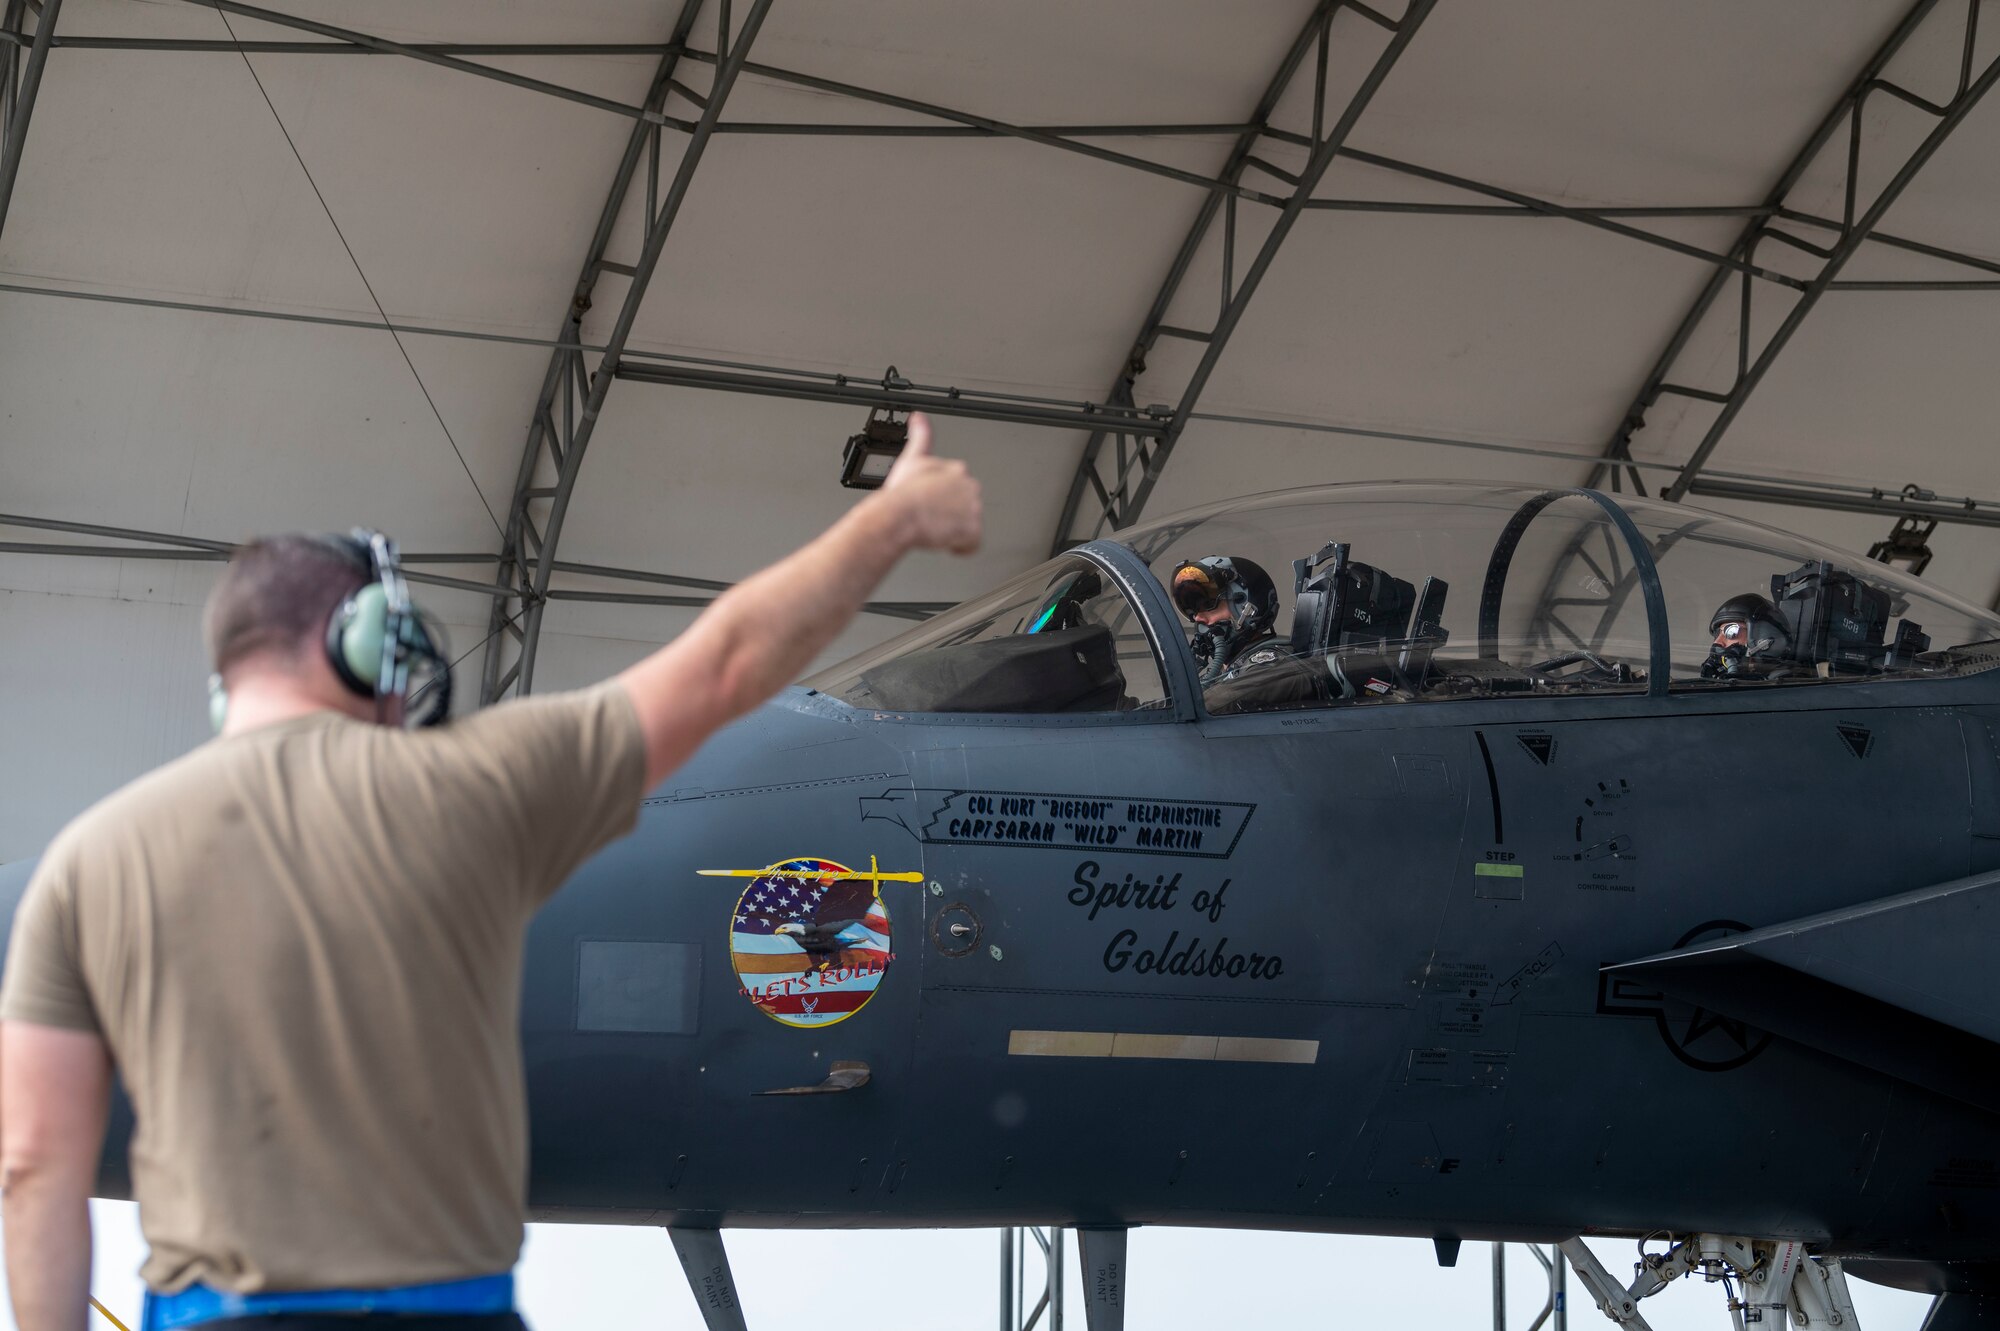 Col. Kurt Kurt Helphinstine, 4th Fighter Wing commander, prepares to take off at Seymour Johnson Air Force Base, North Carolina, May 2, 2022. Helphinstine took his final flight as the commander of the 4th FW. (U.S. Air Force photo by Senior Airman Kevin Holloway)